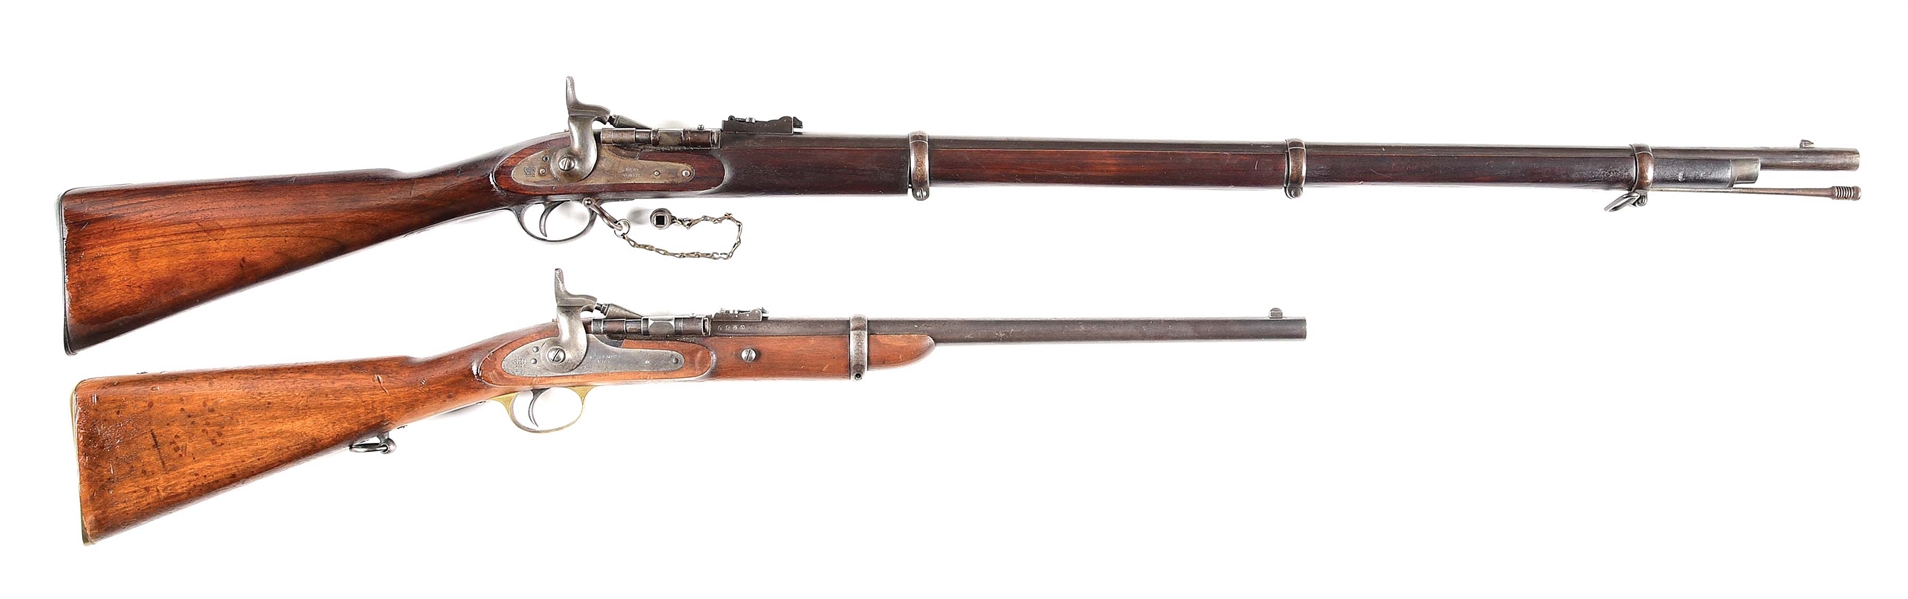 (A) LOT OF 2: SINGLE SHOT CONVERSION RIFLE AND CARBINE.